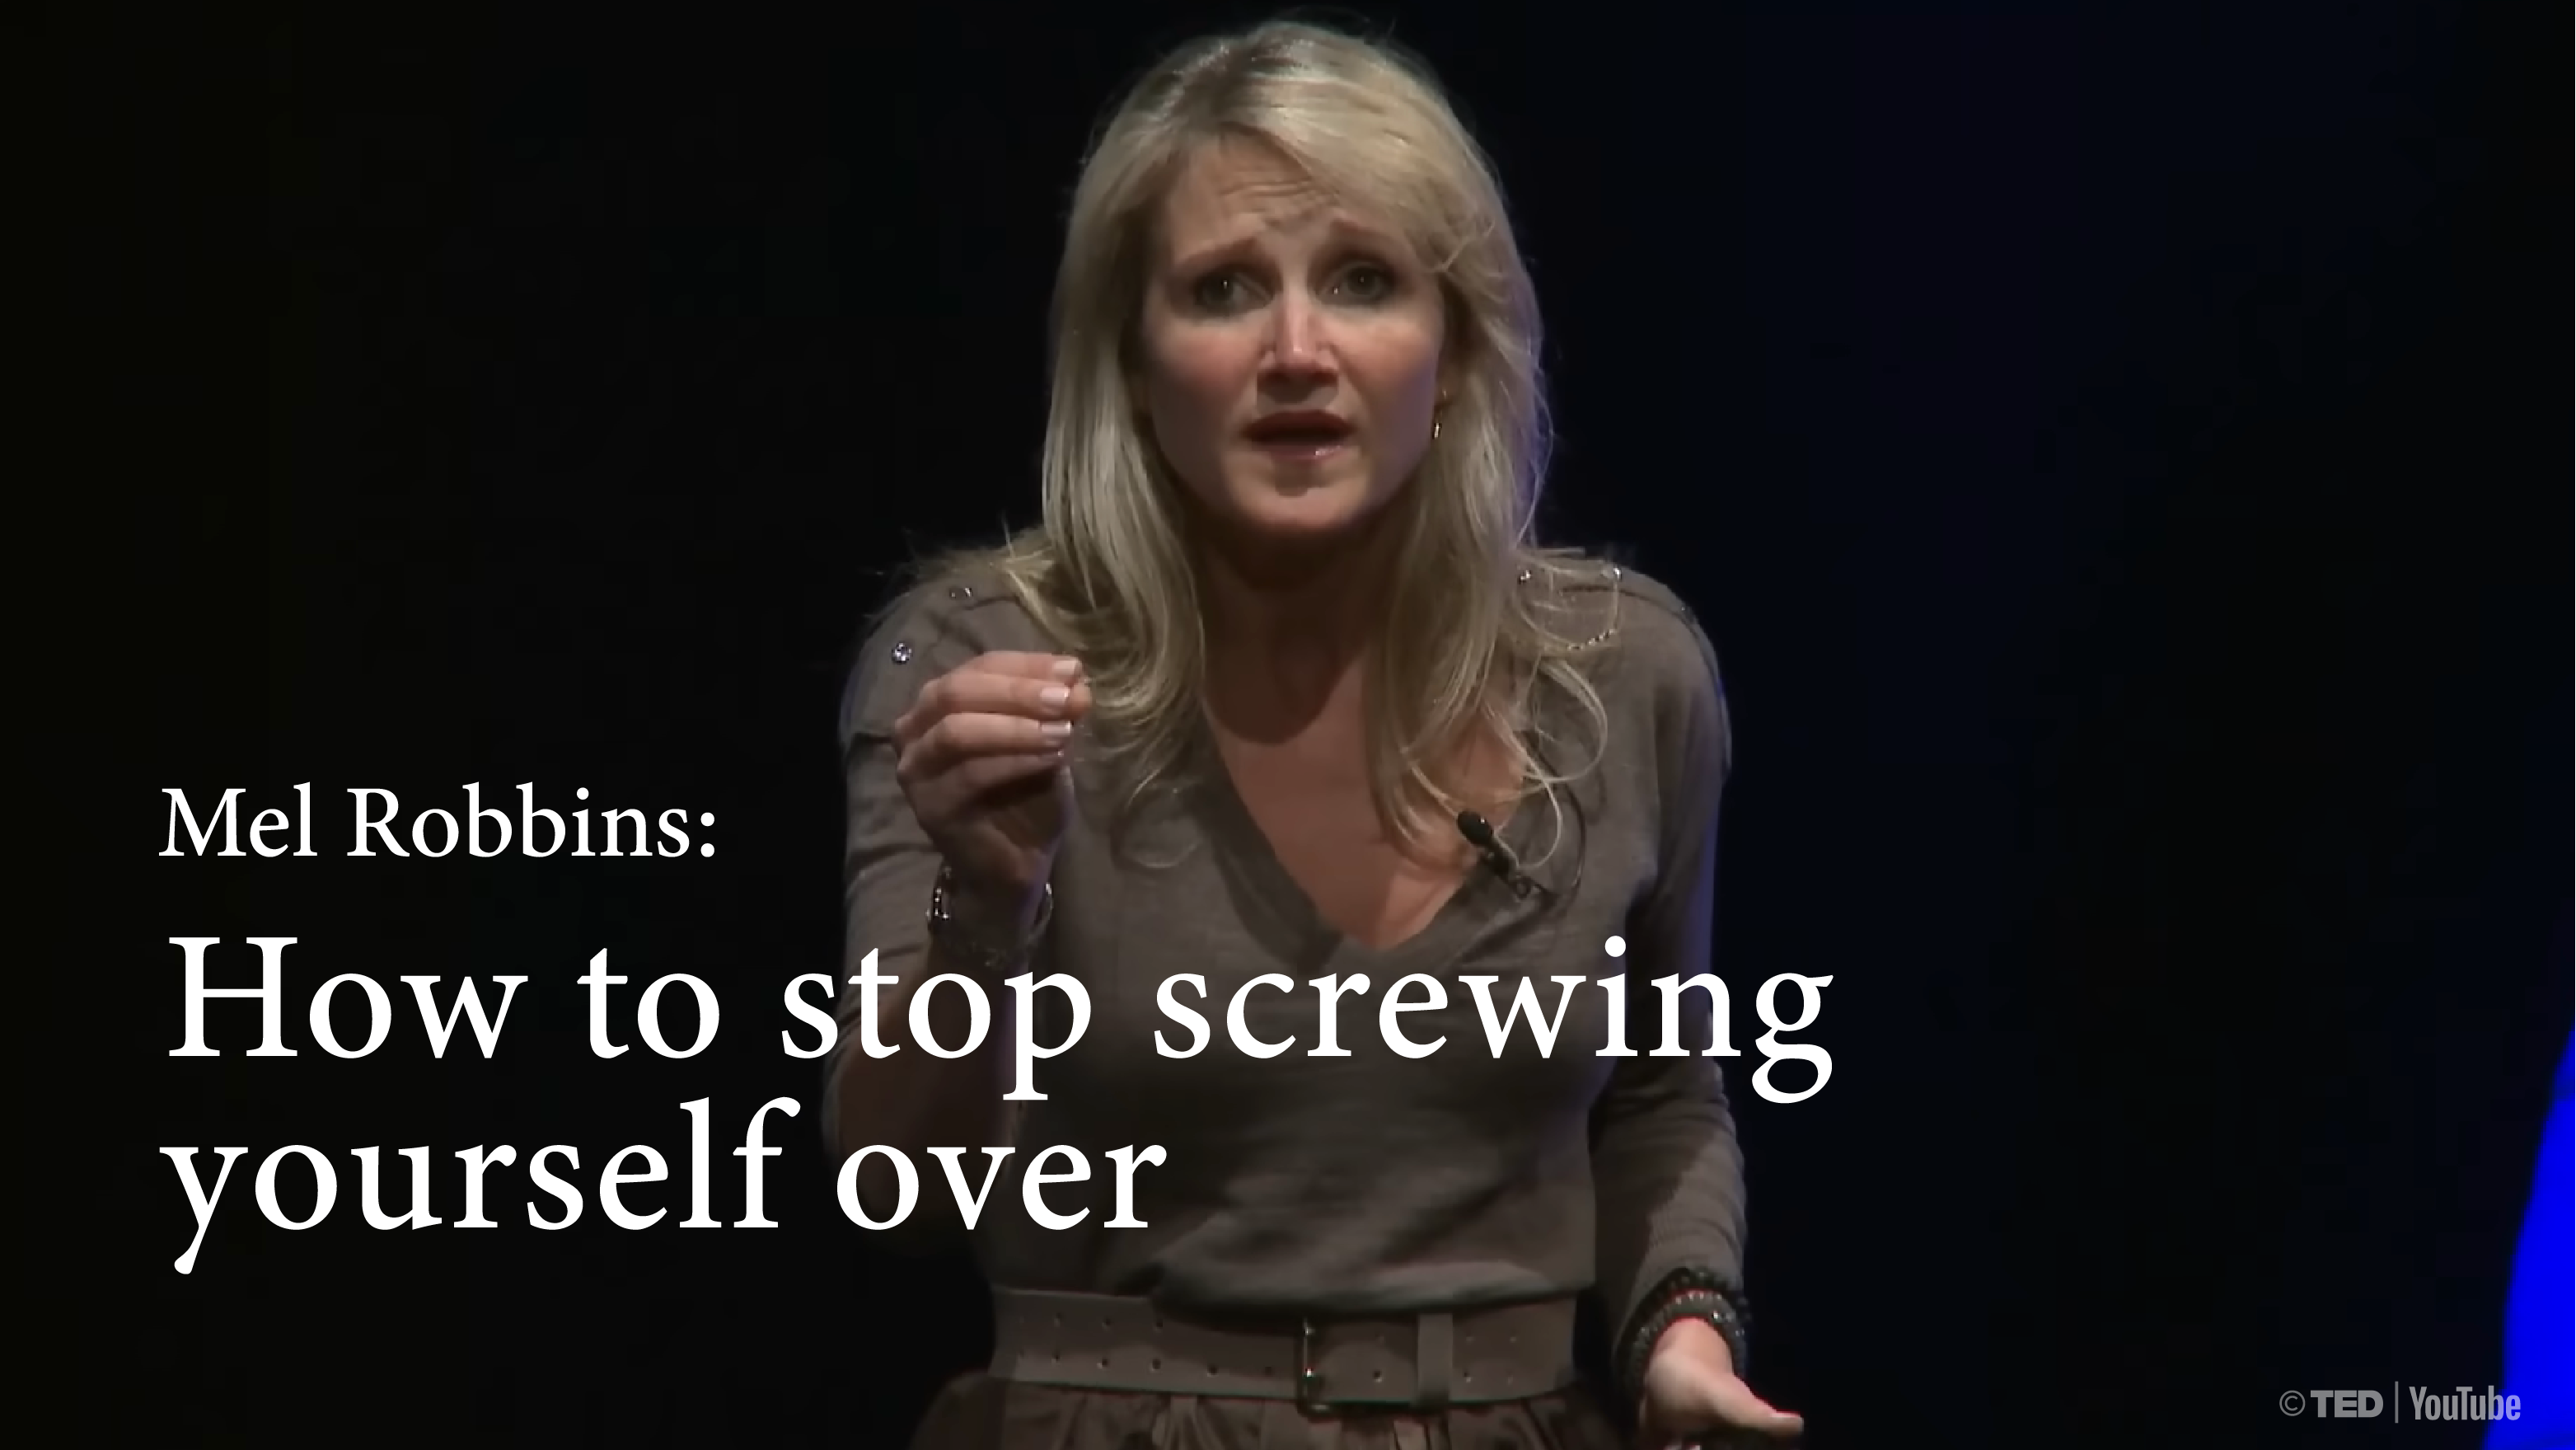 [B] How to stop screwing yourself over | Mel Robbins [PRACTICE]